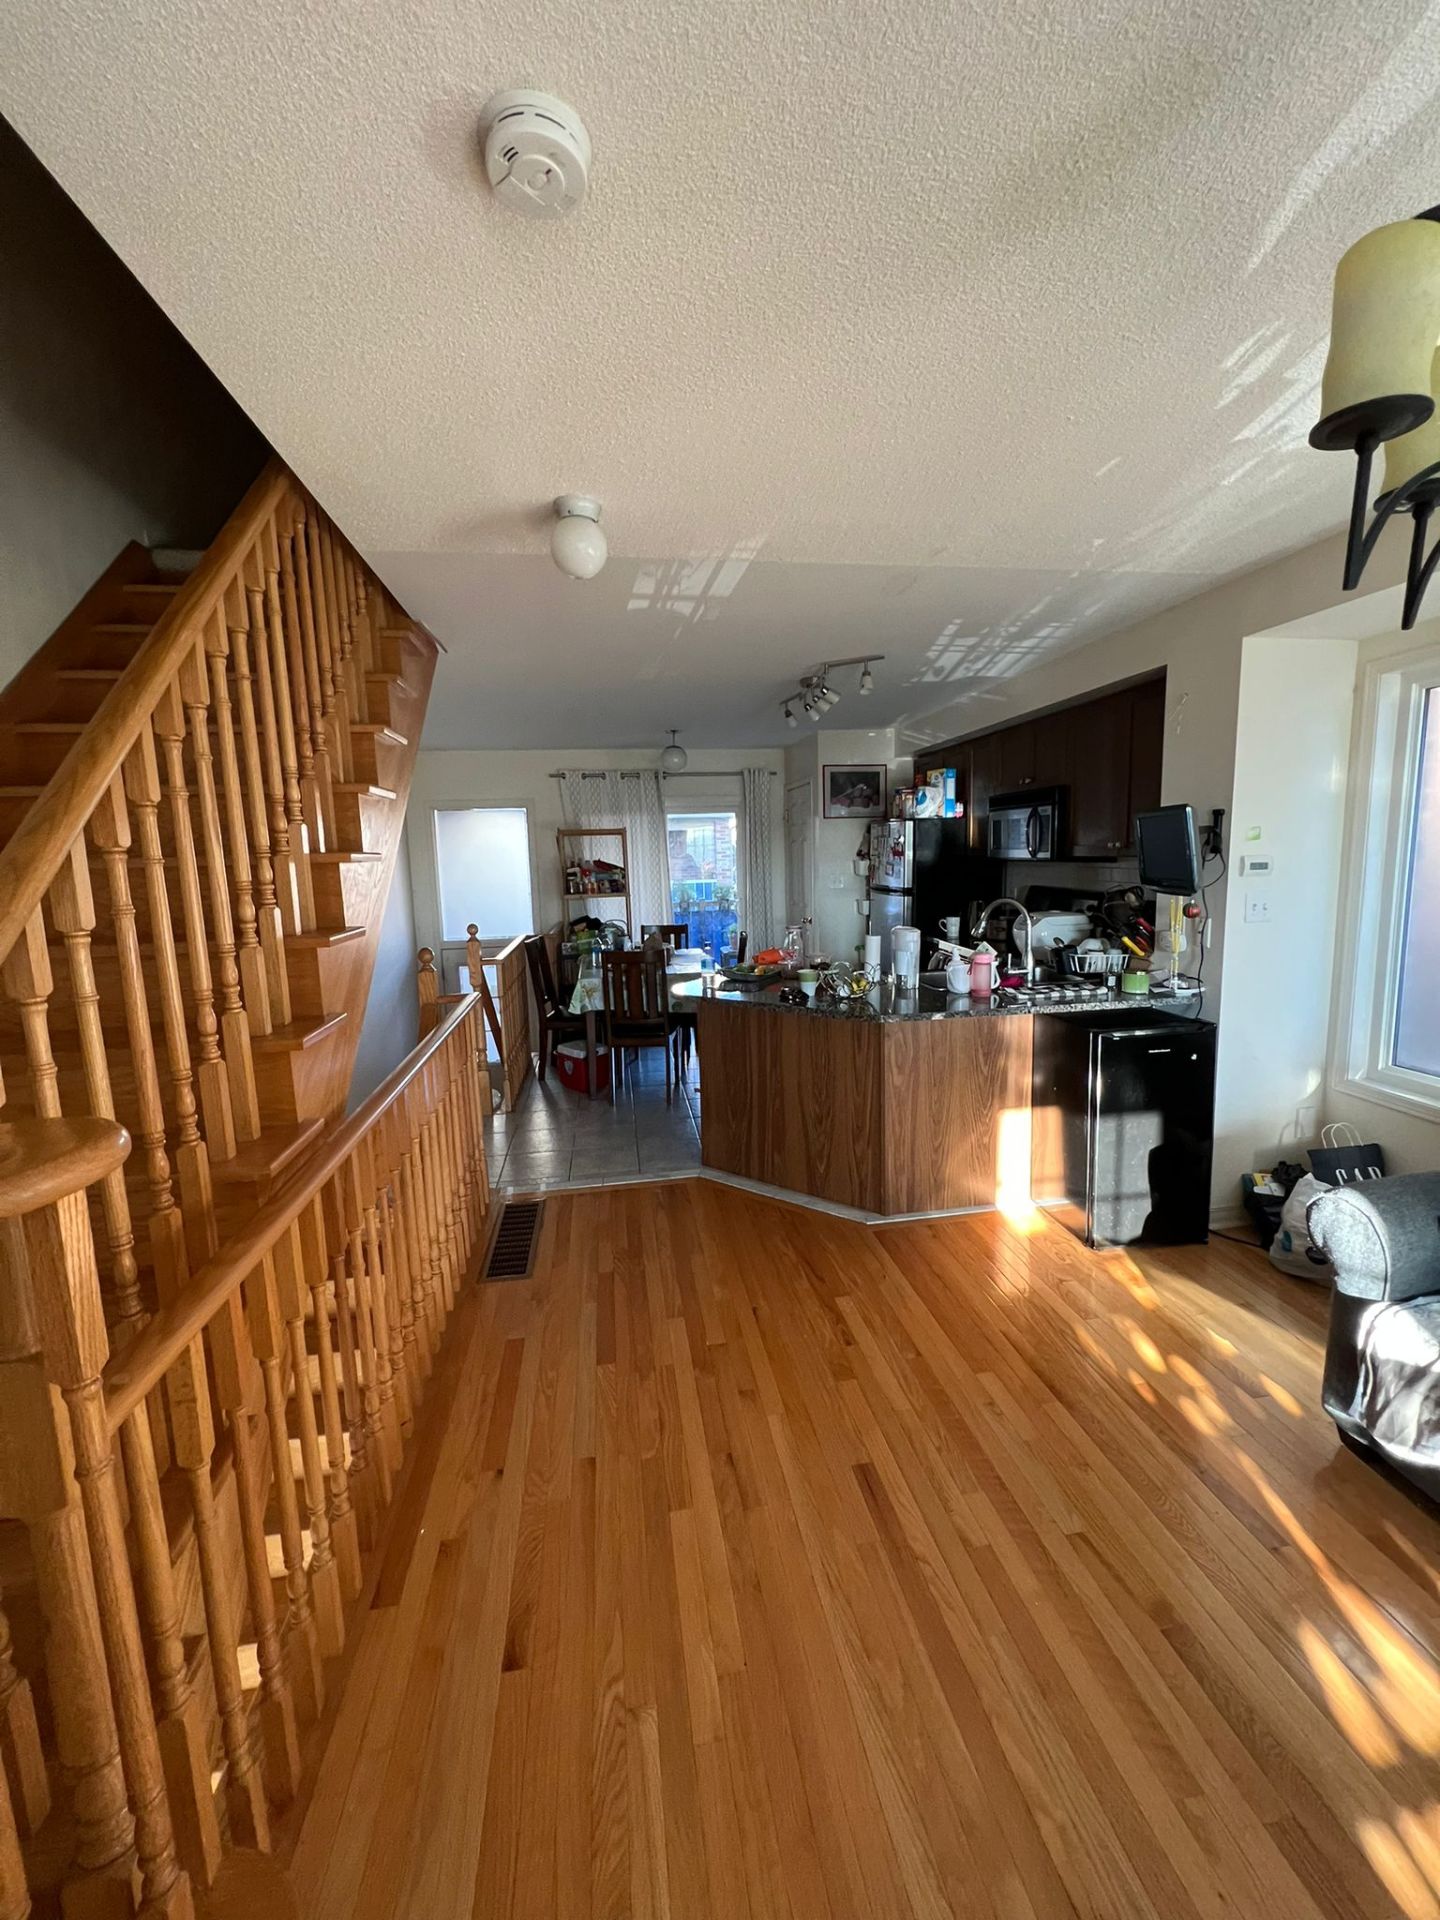 Premium Homestay Room - Torbarrie Rd, North York room for rent 61